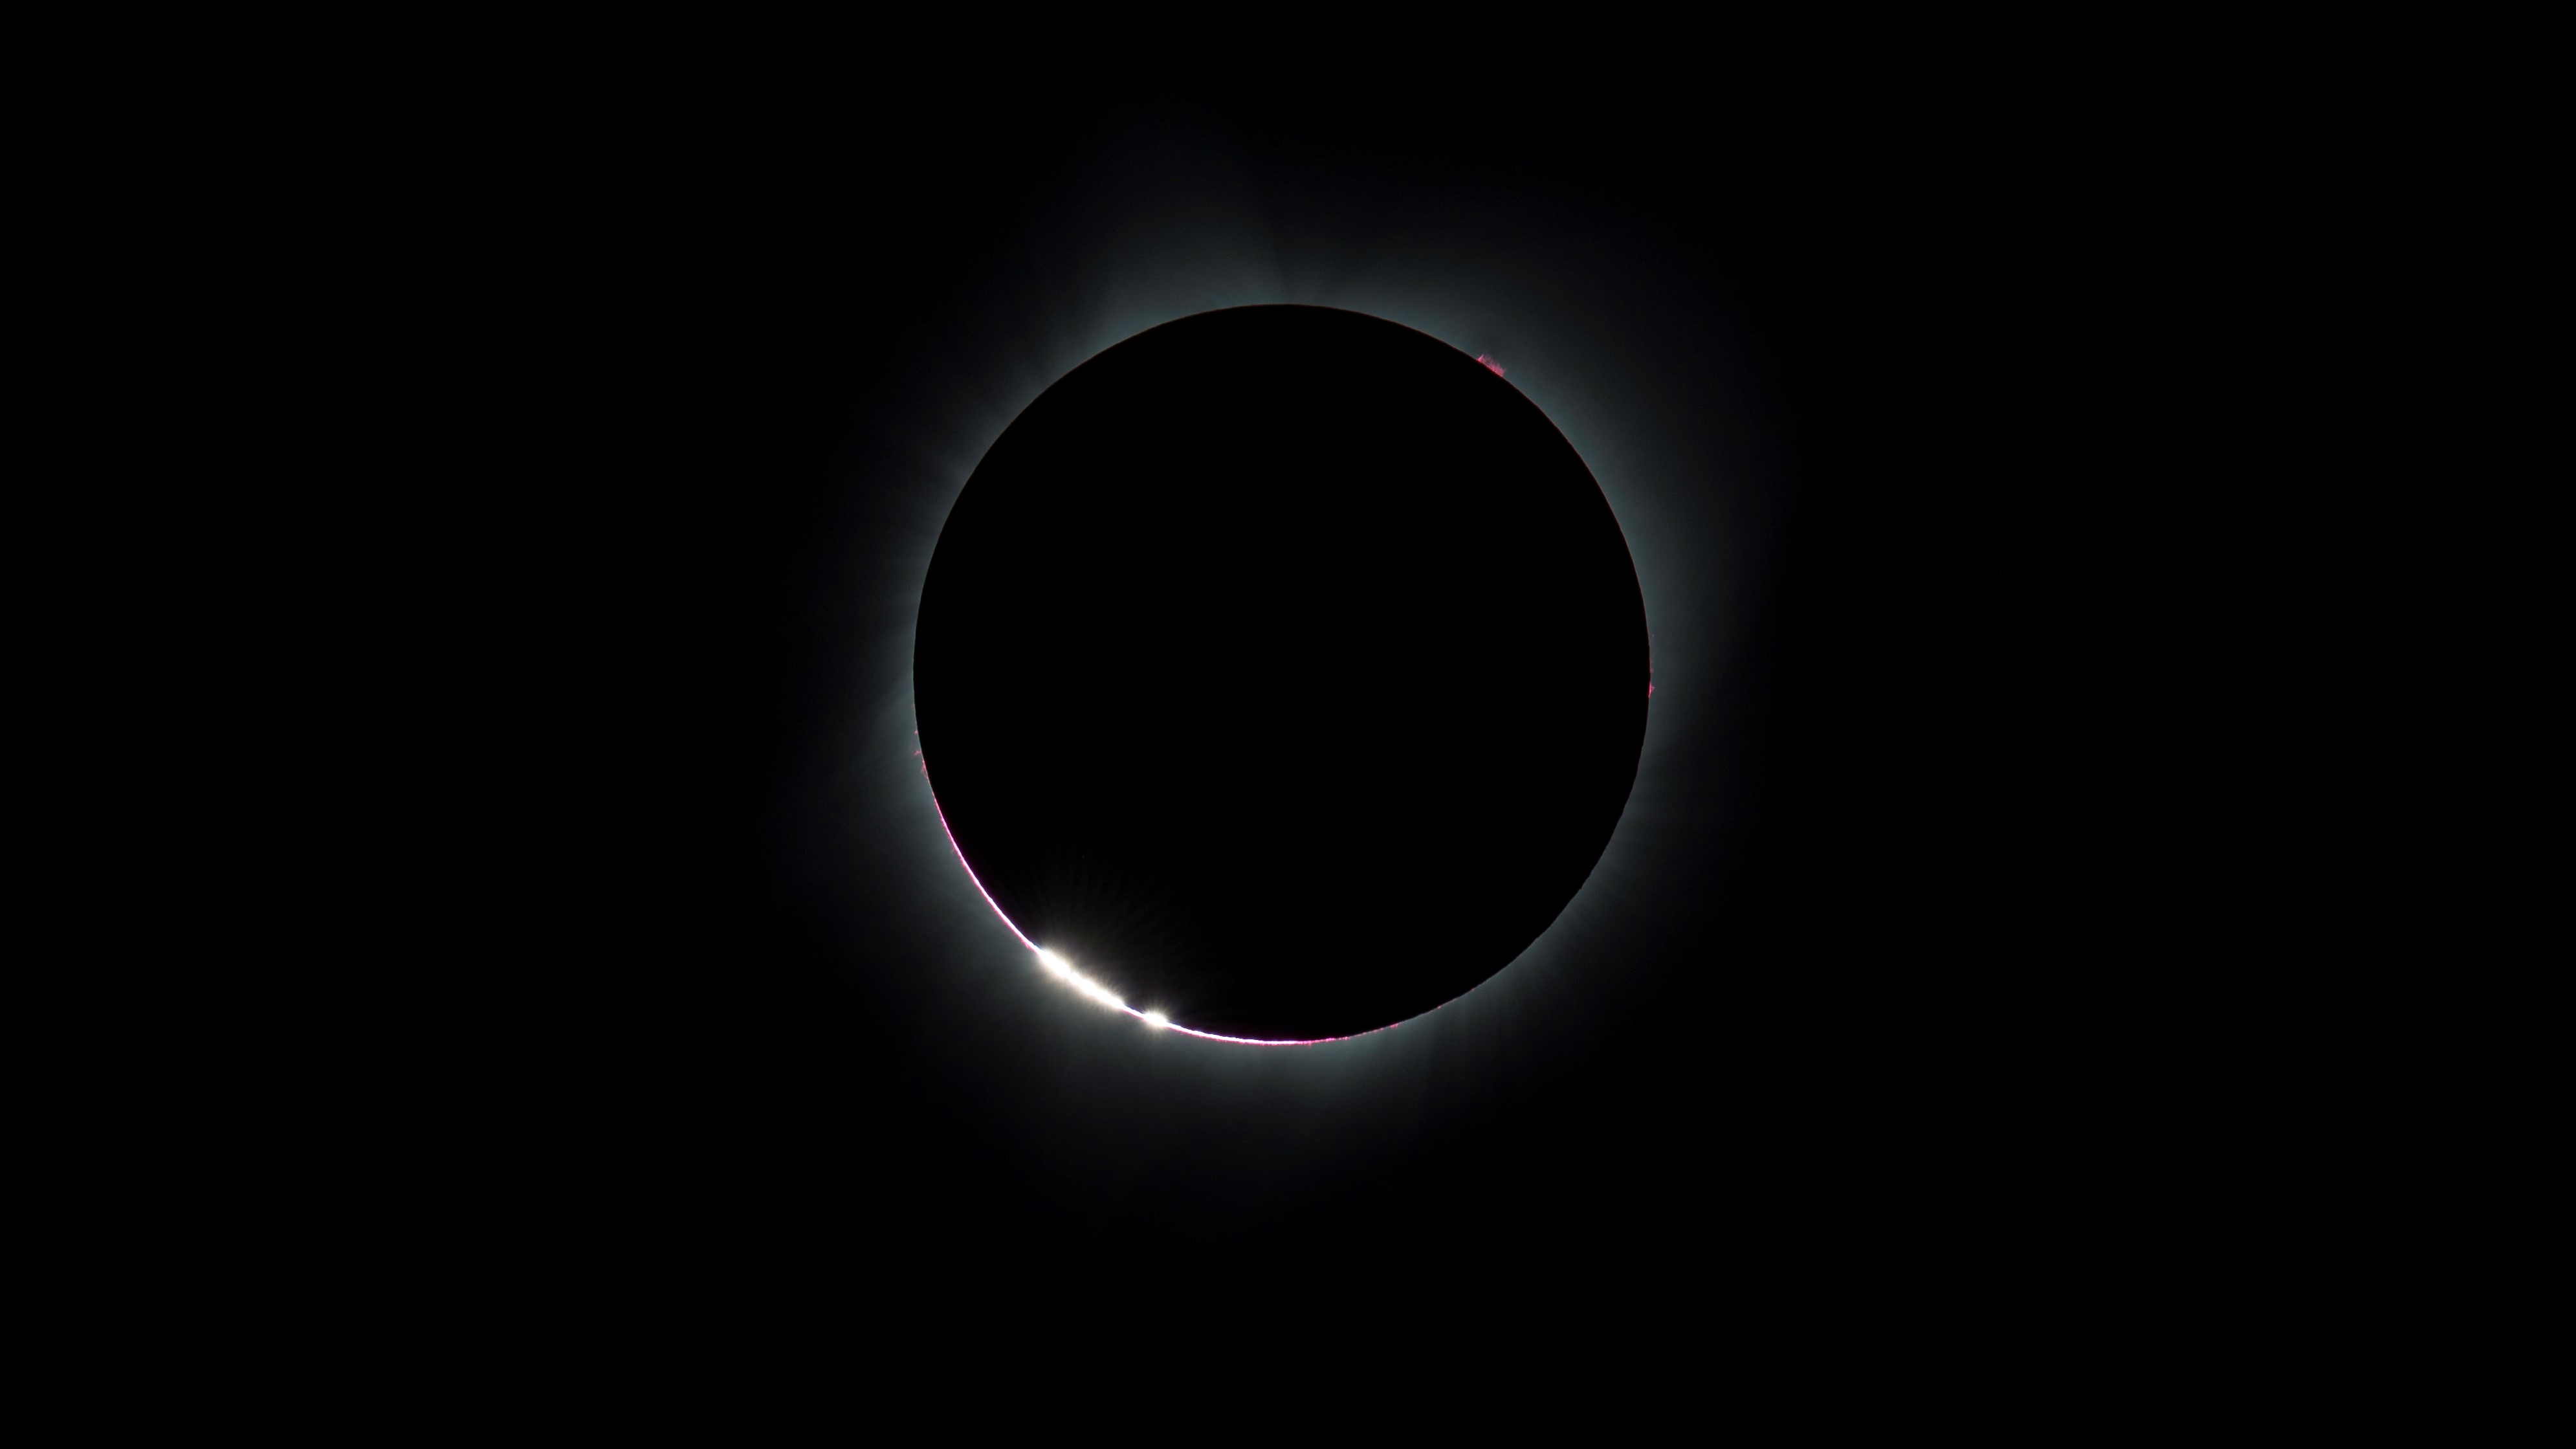 Bright grains of light are produced around the edge of a pre-total solar eclipse.